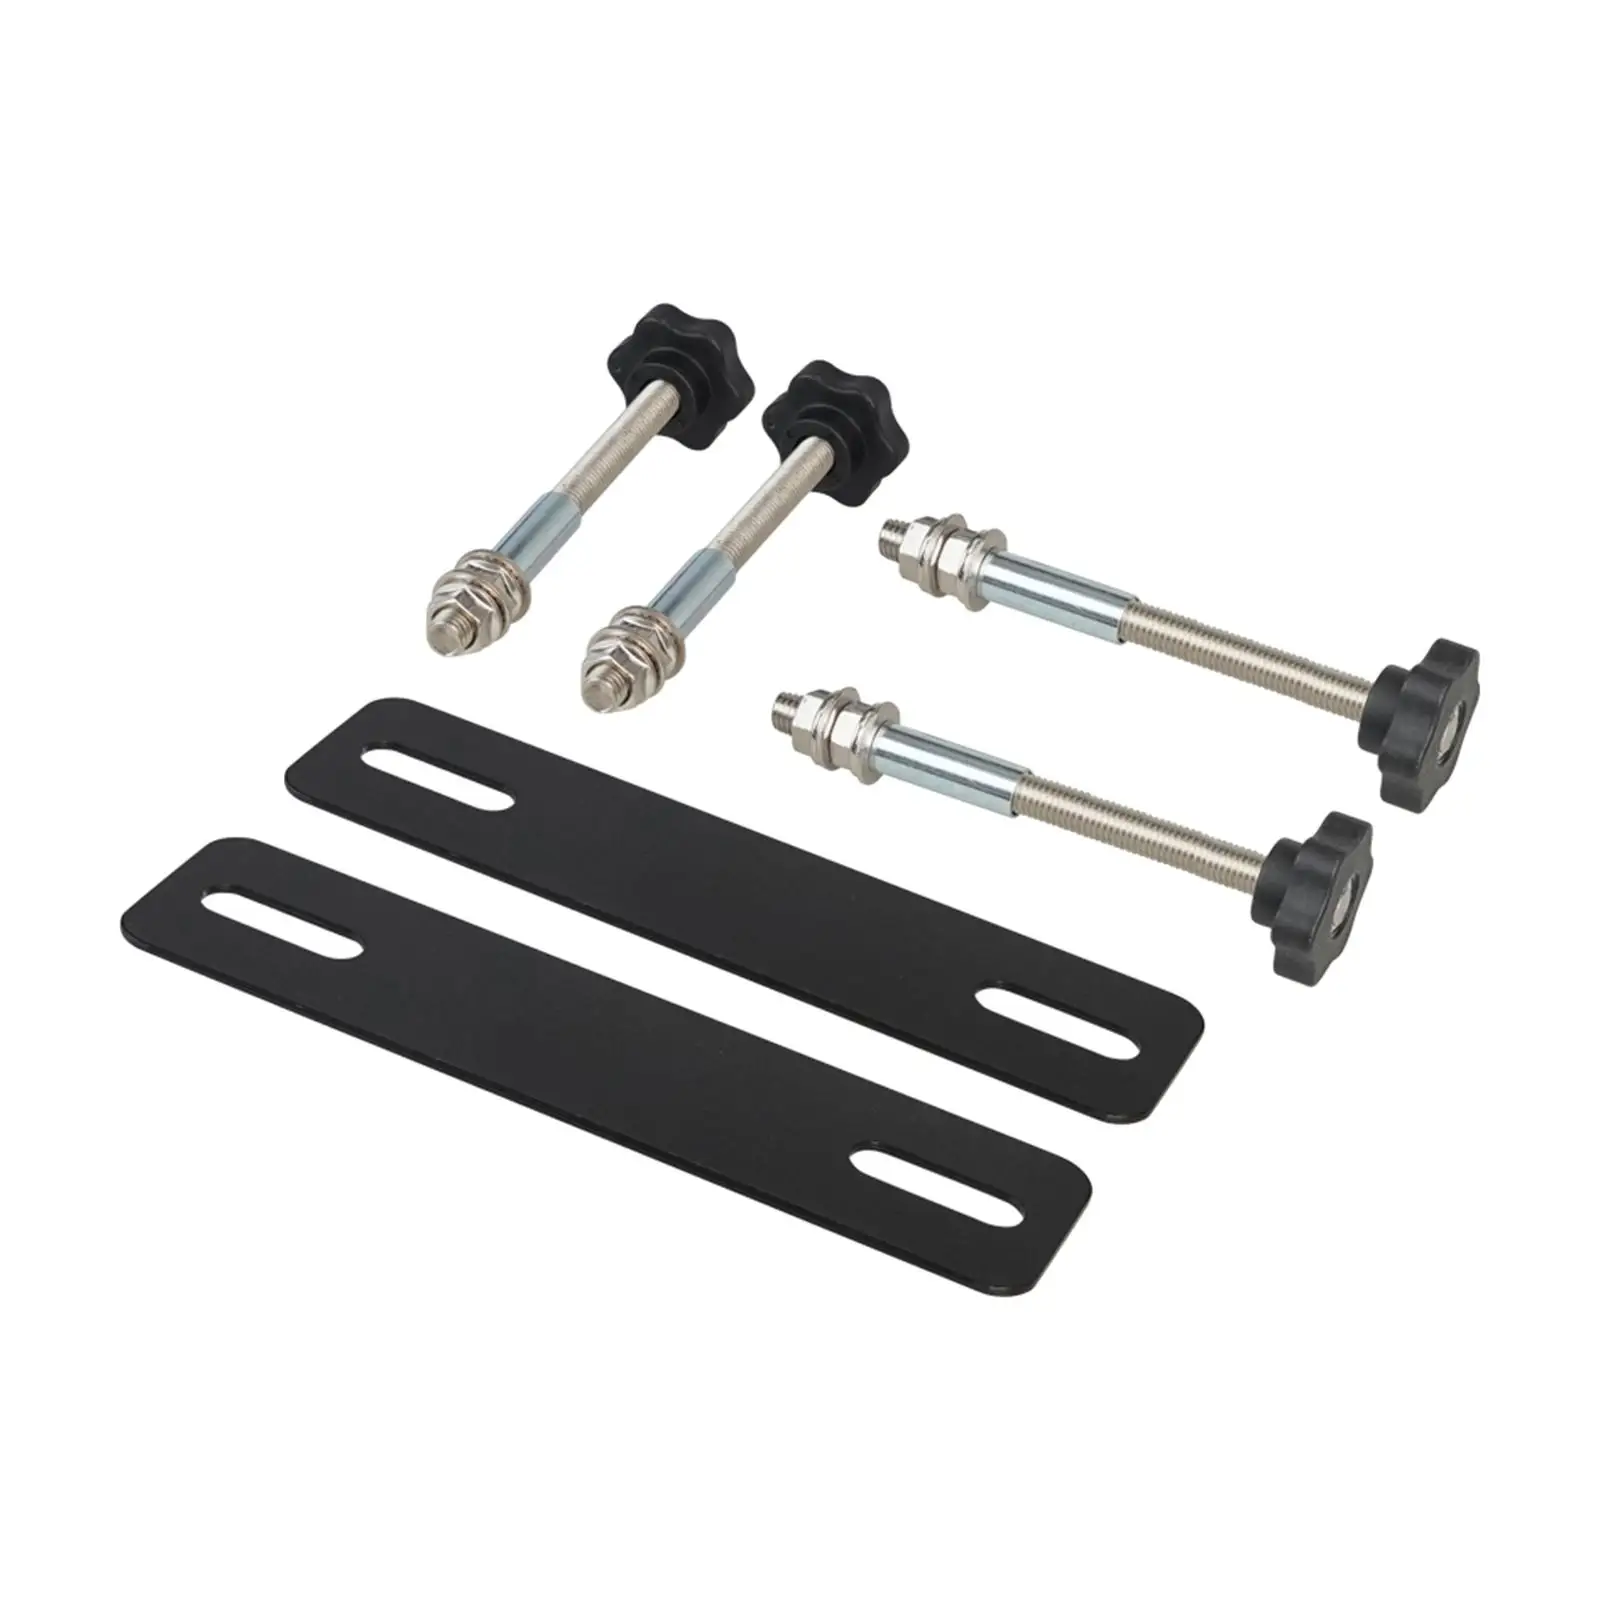 Mounting Pins Kits Easy Installation Durable Professional Direct Replaces Accessories Repair Parts Hardware for Traction Boards